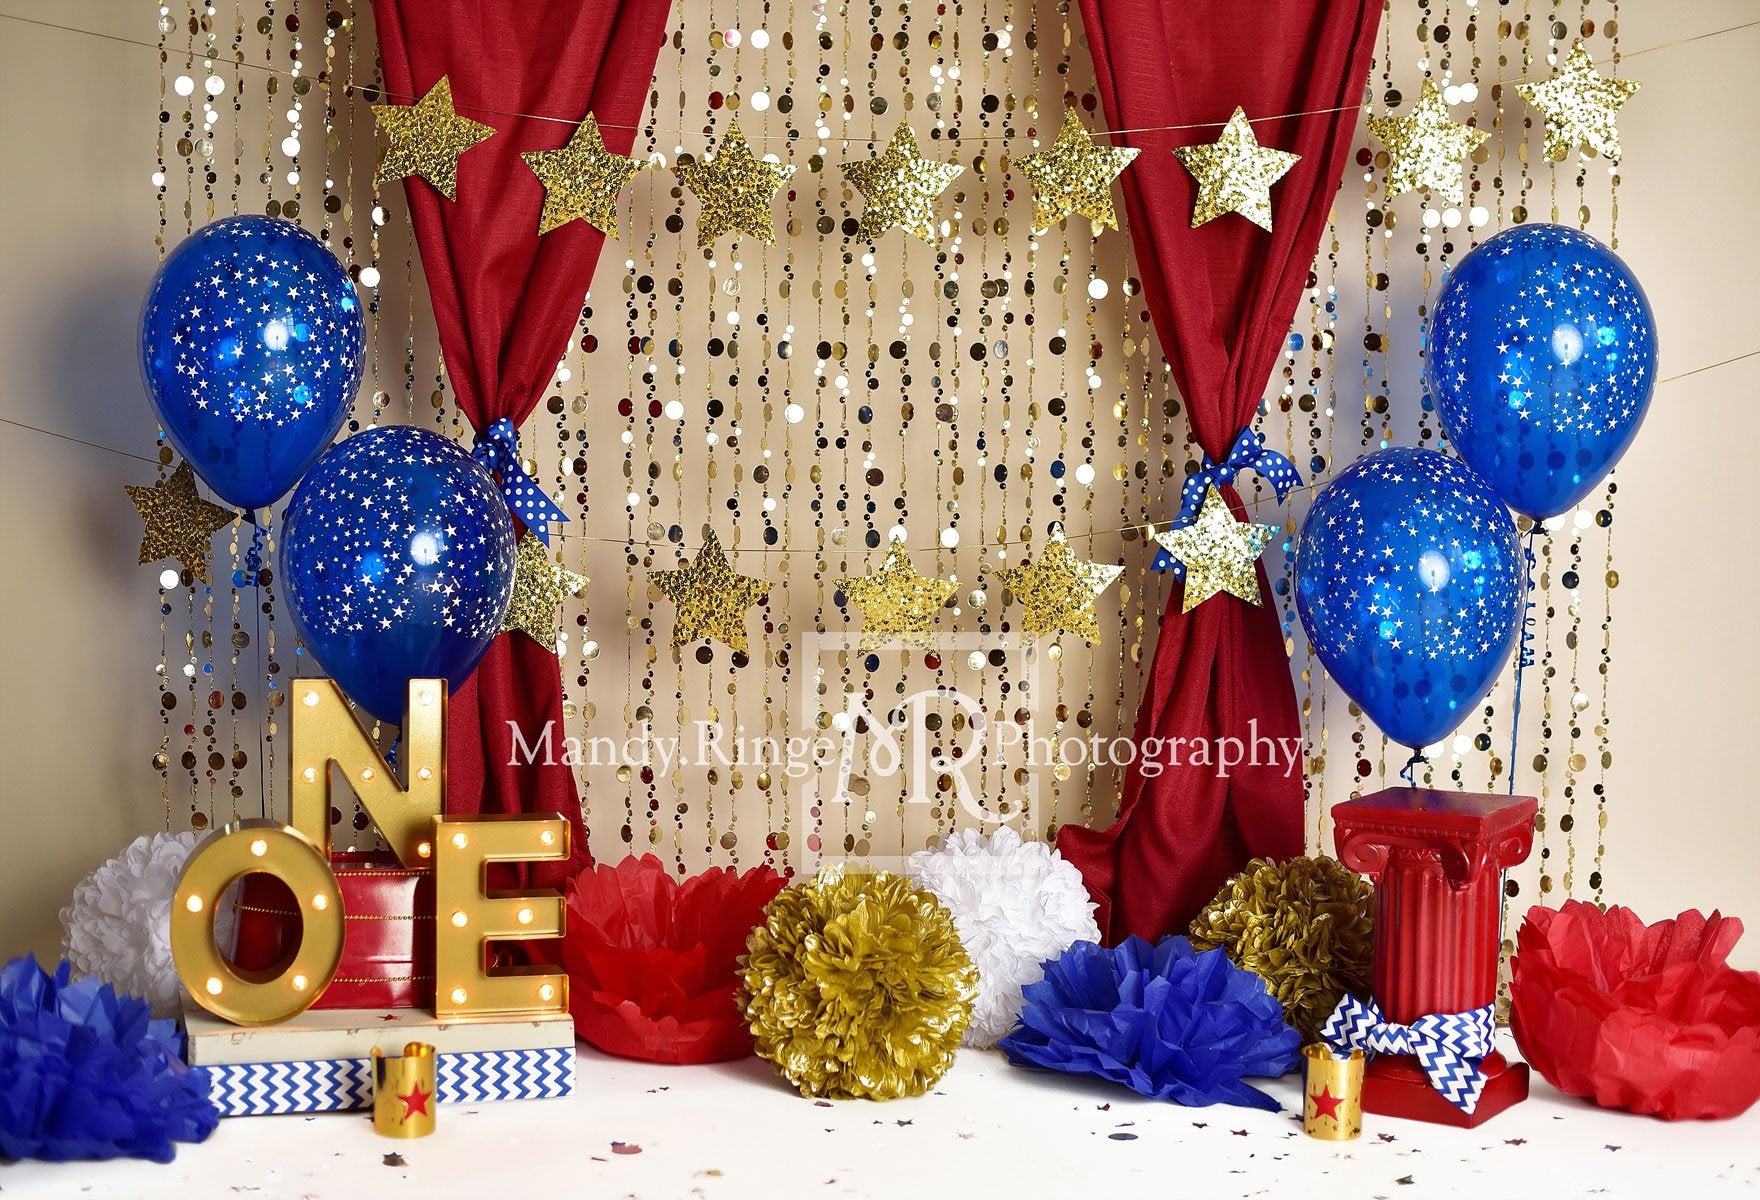 Kate 1st Birthday Balloons Backdrop Designed by Mandy Ringe Photography